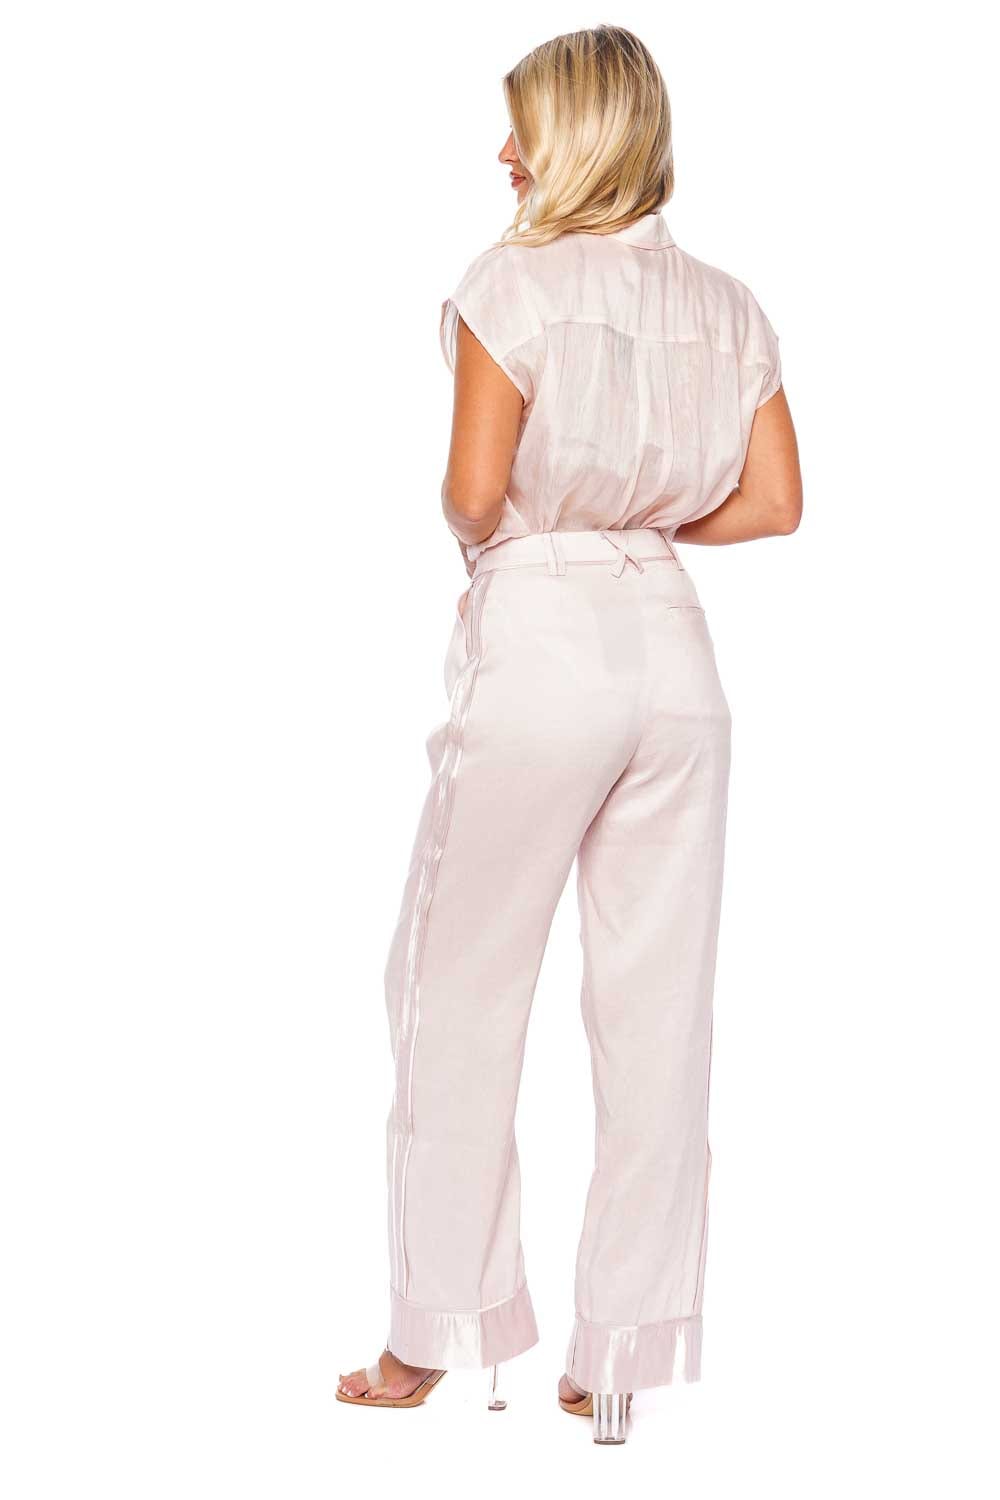 Aje. Insight Deconstructed Pant 24RE3097 SOFT PINK